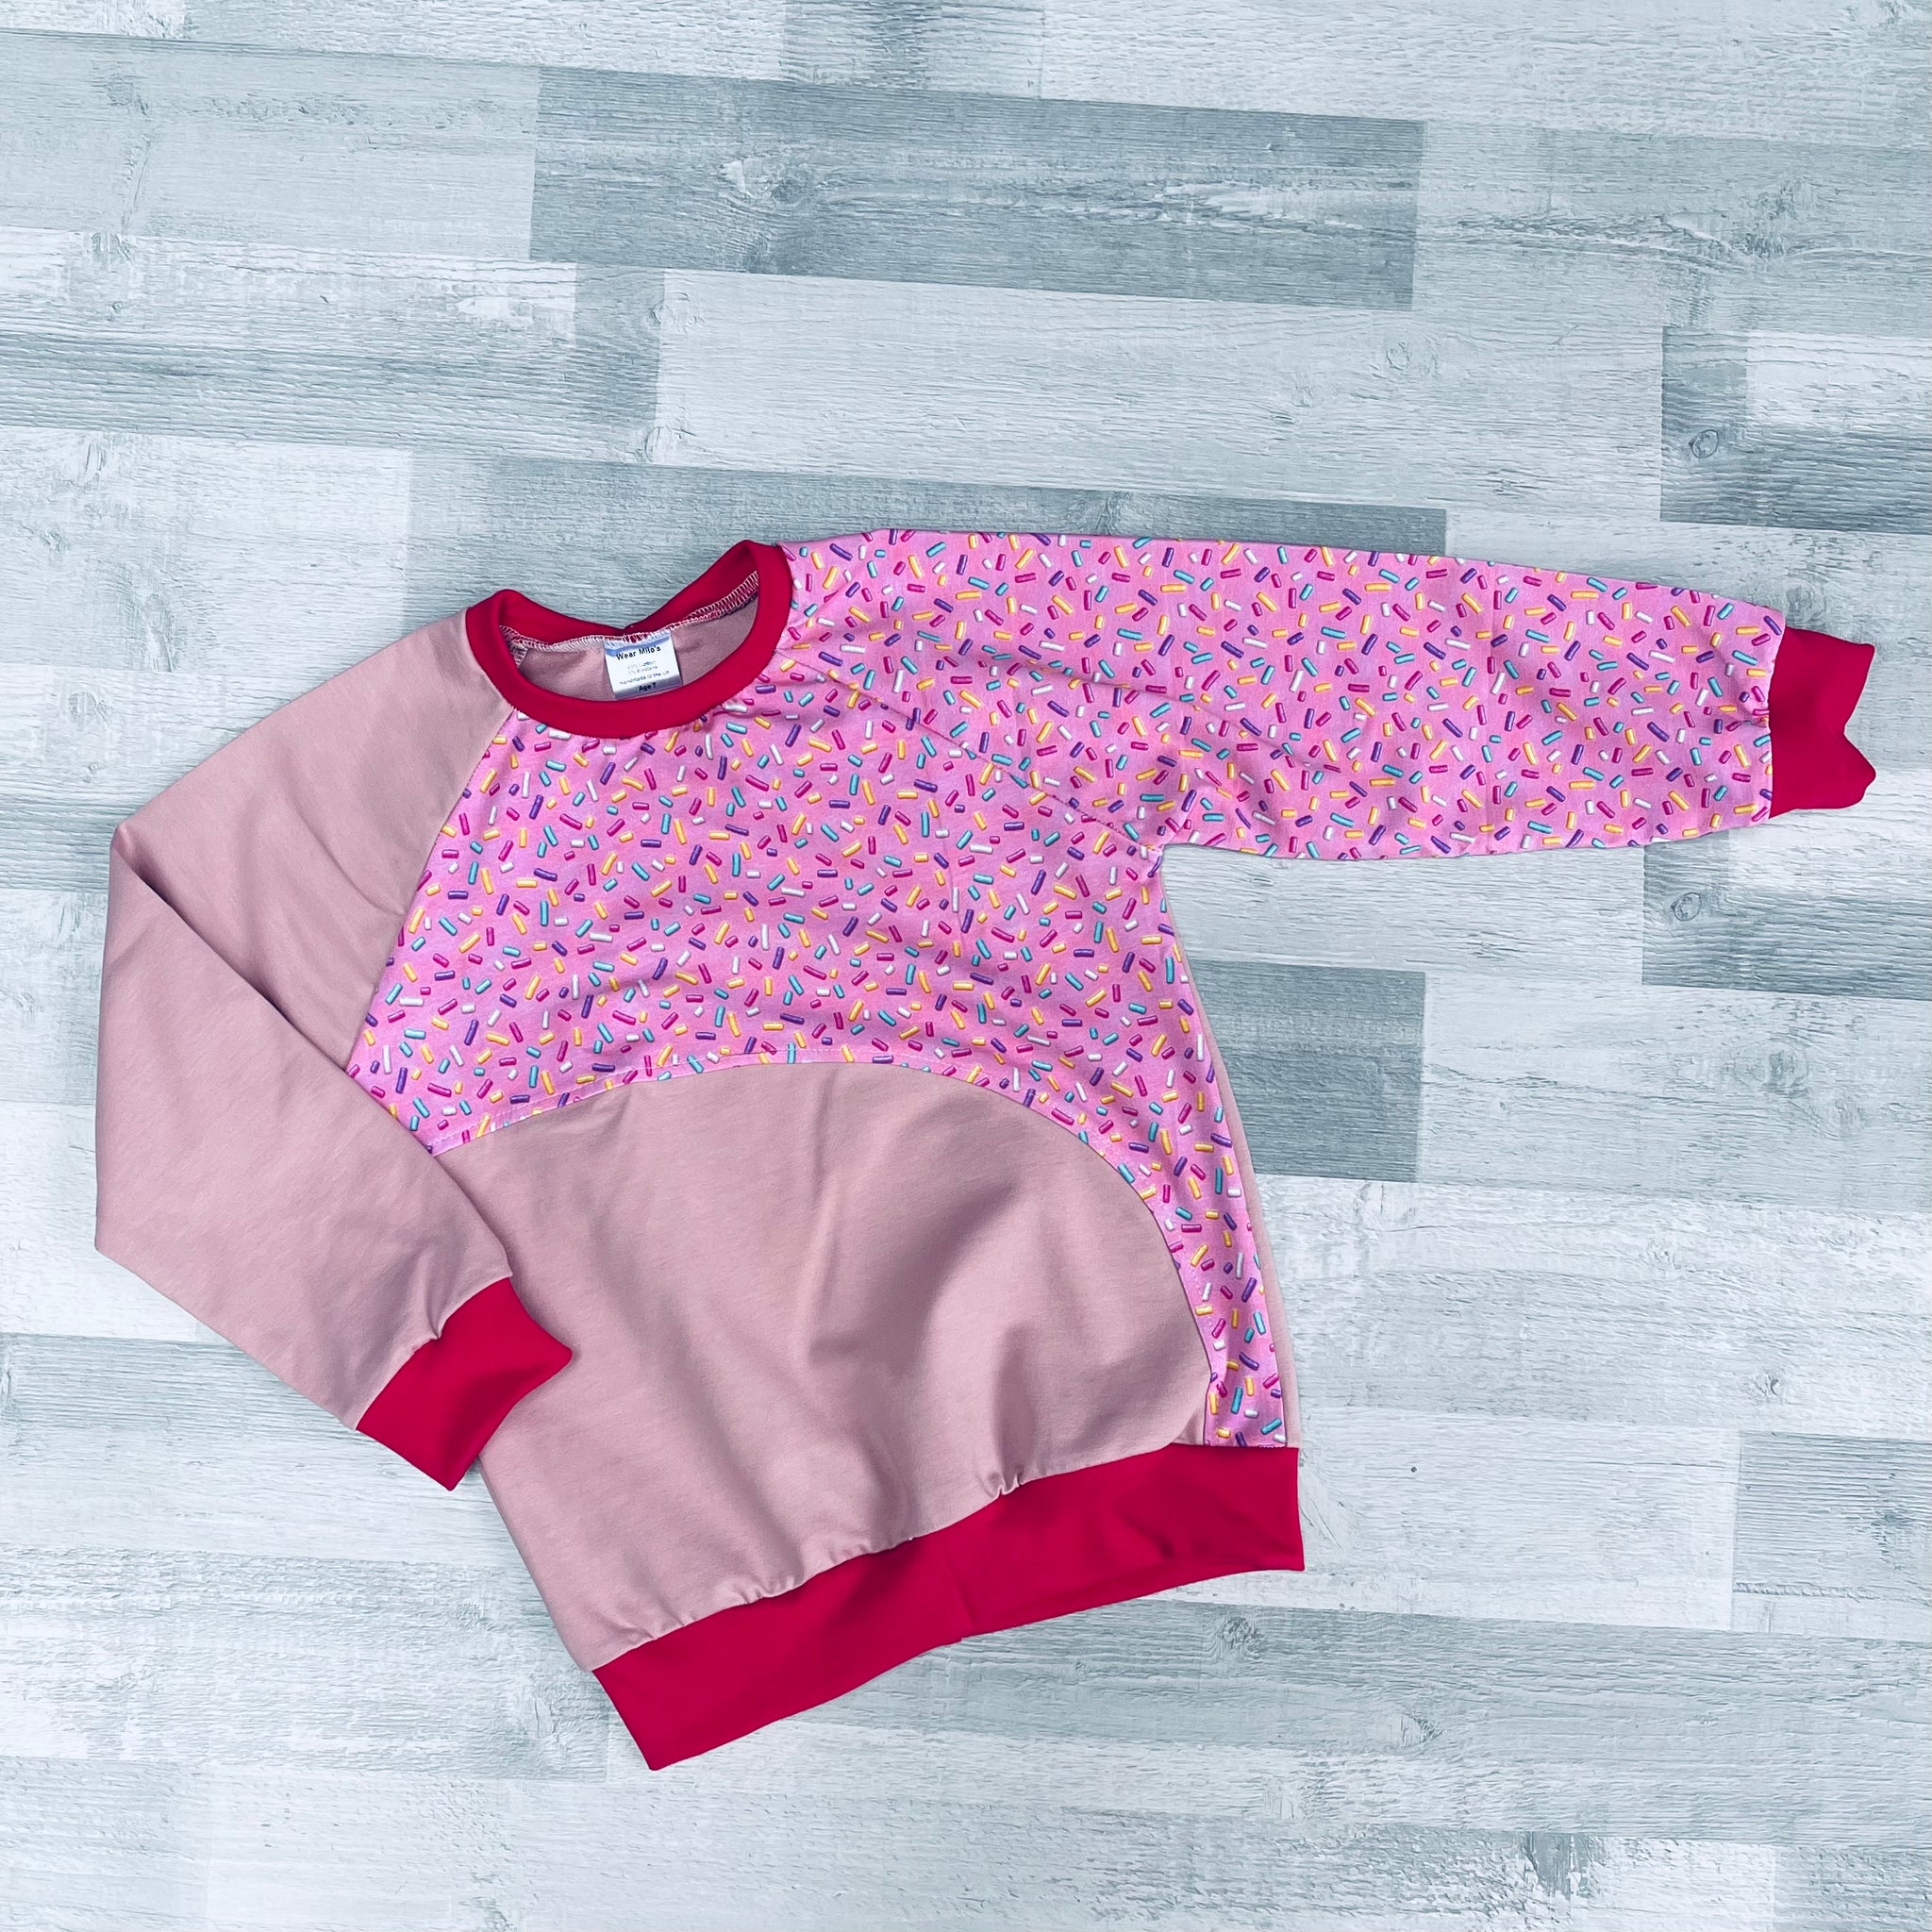 Sprinkles Curved Sweater